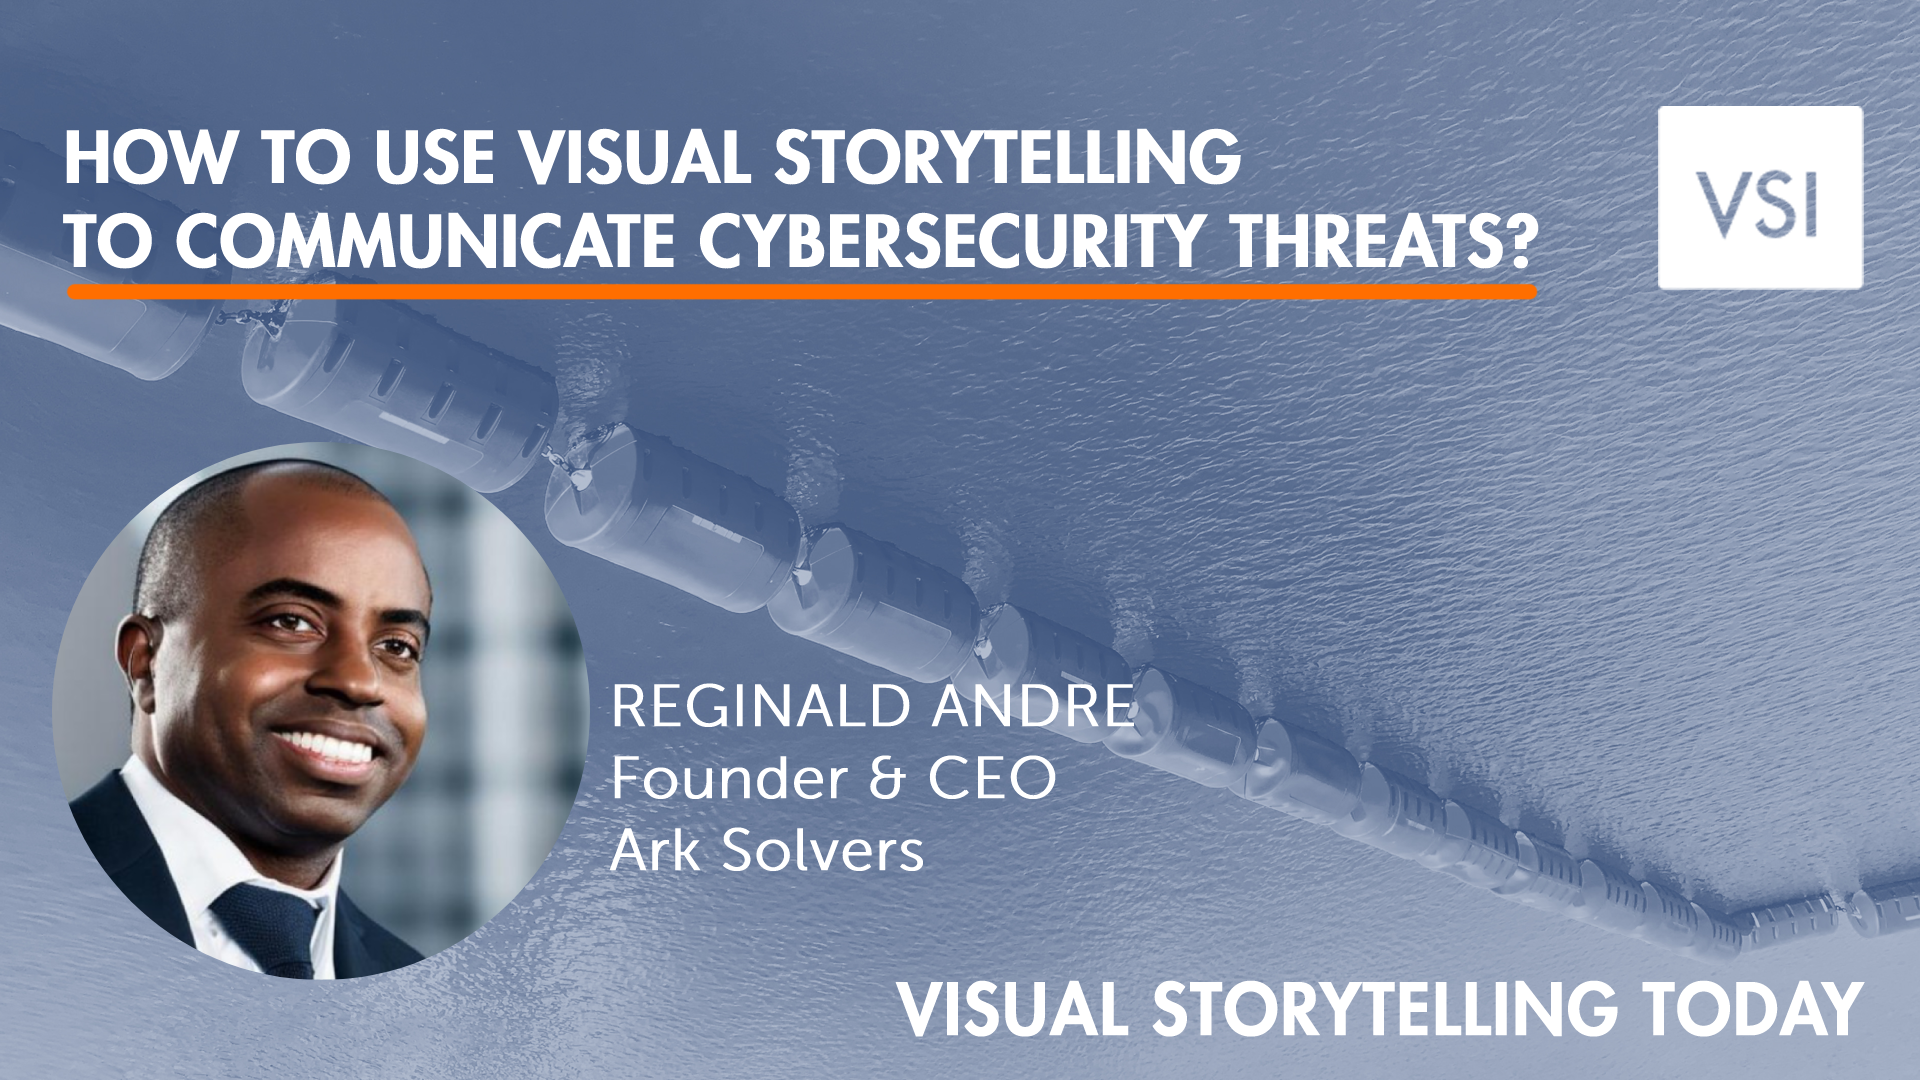 How To Use Visual Storytelling To Communicate Cybersecurity Threats?